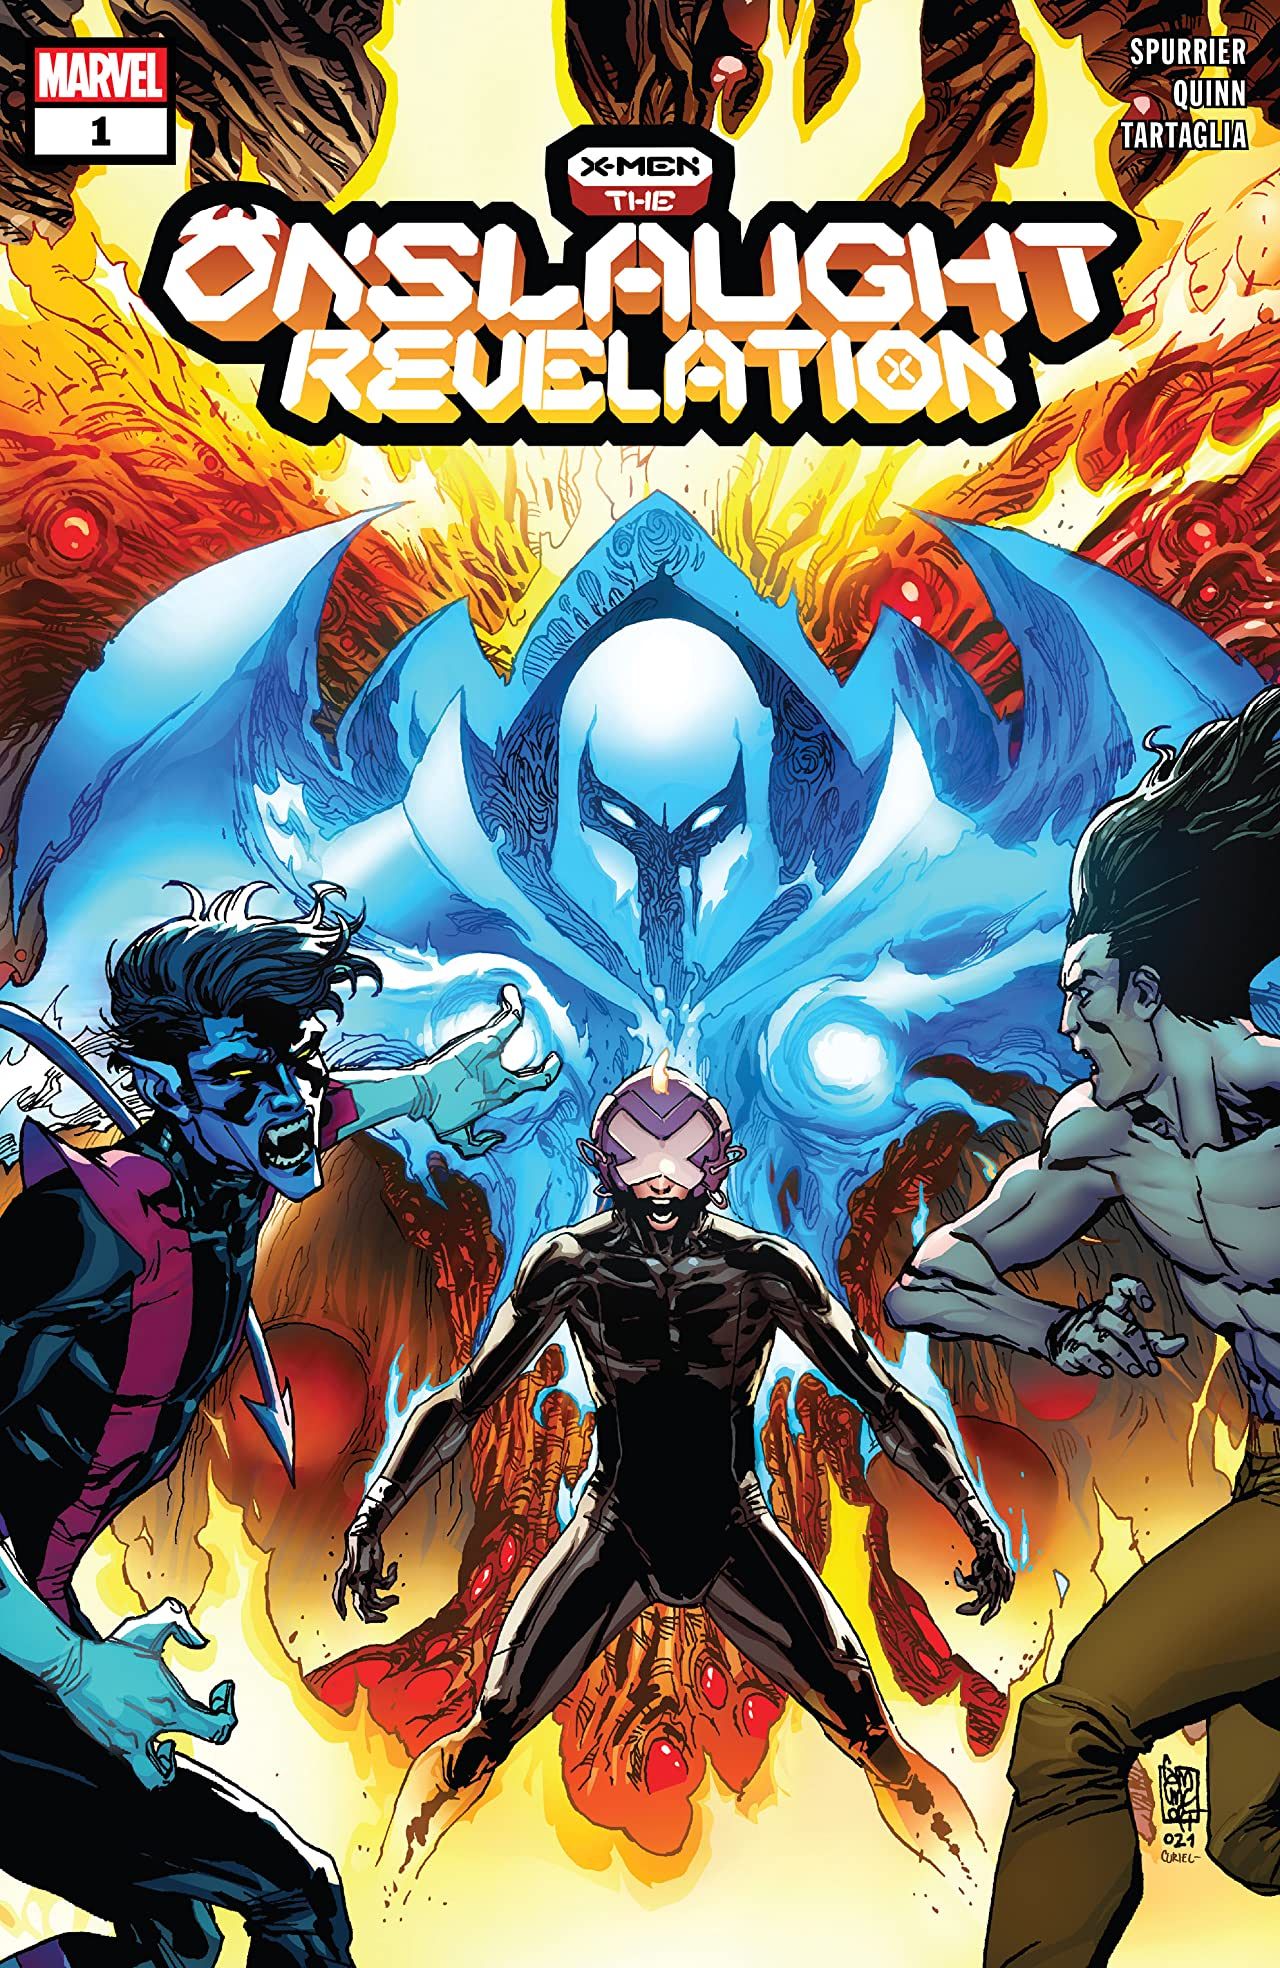 Nightcrawler, Legion and Professor X on the cover of X-Men Onslaught Revelation 1 by Giuseppe Camuncoli